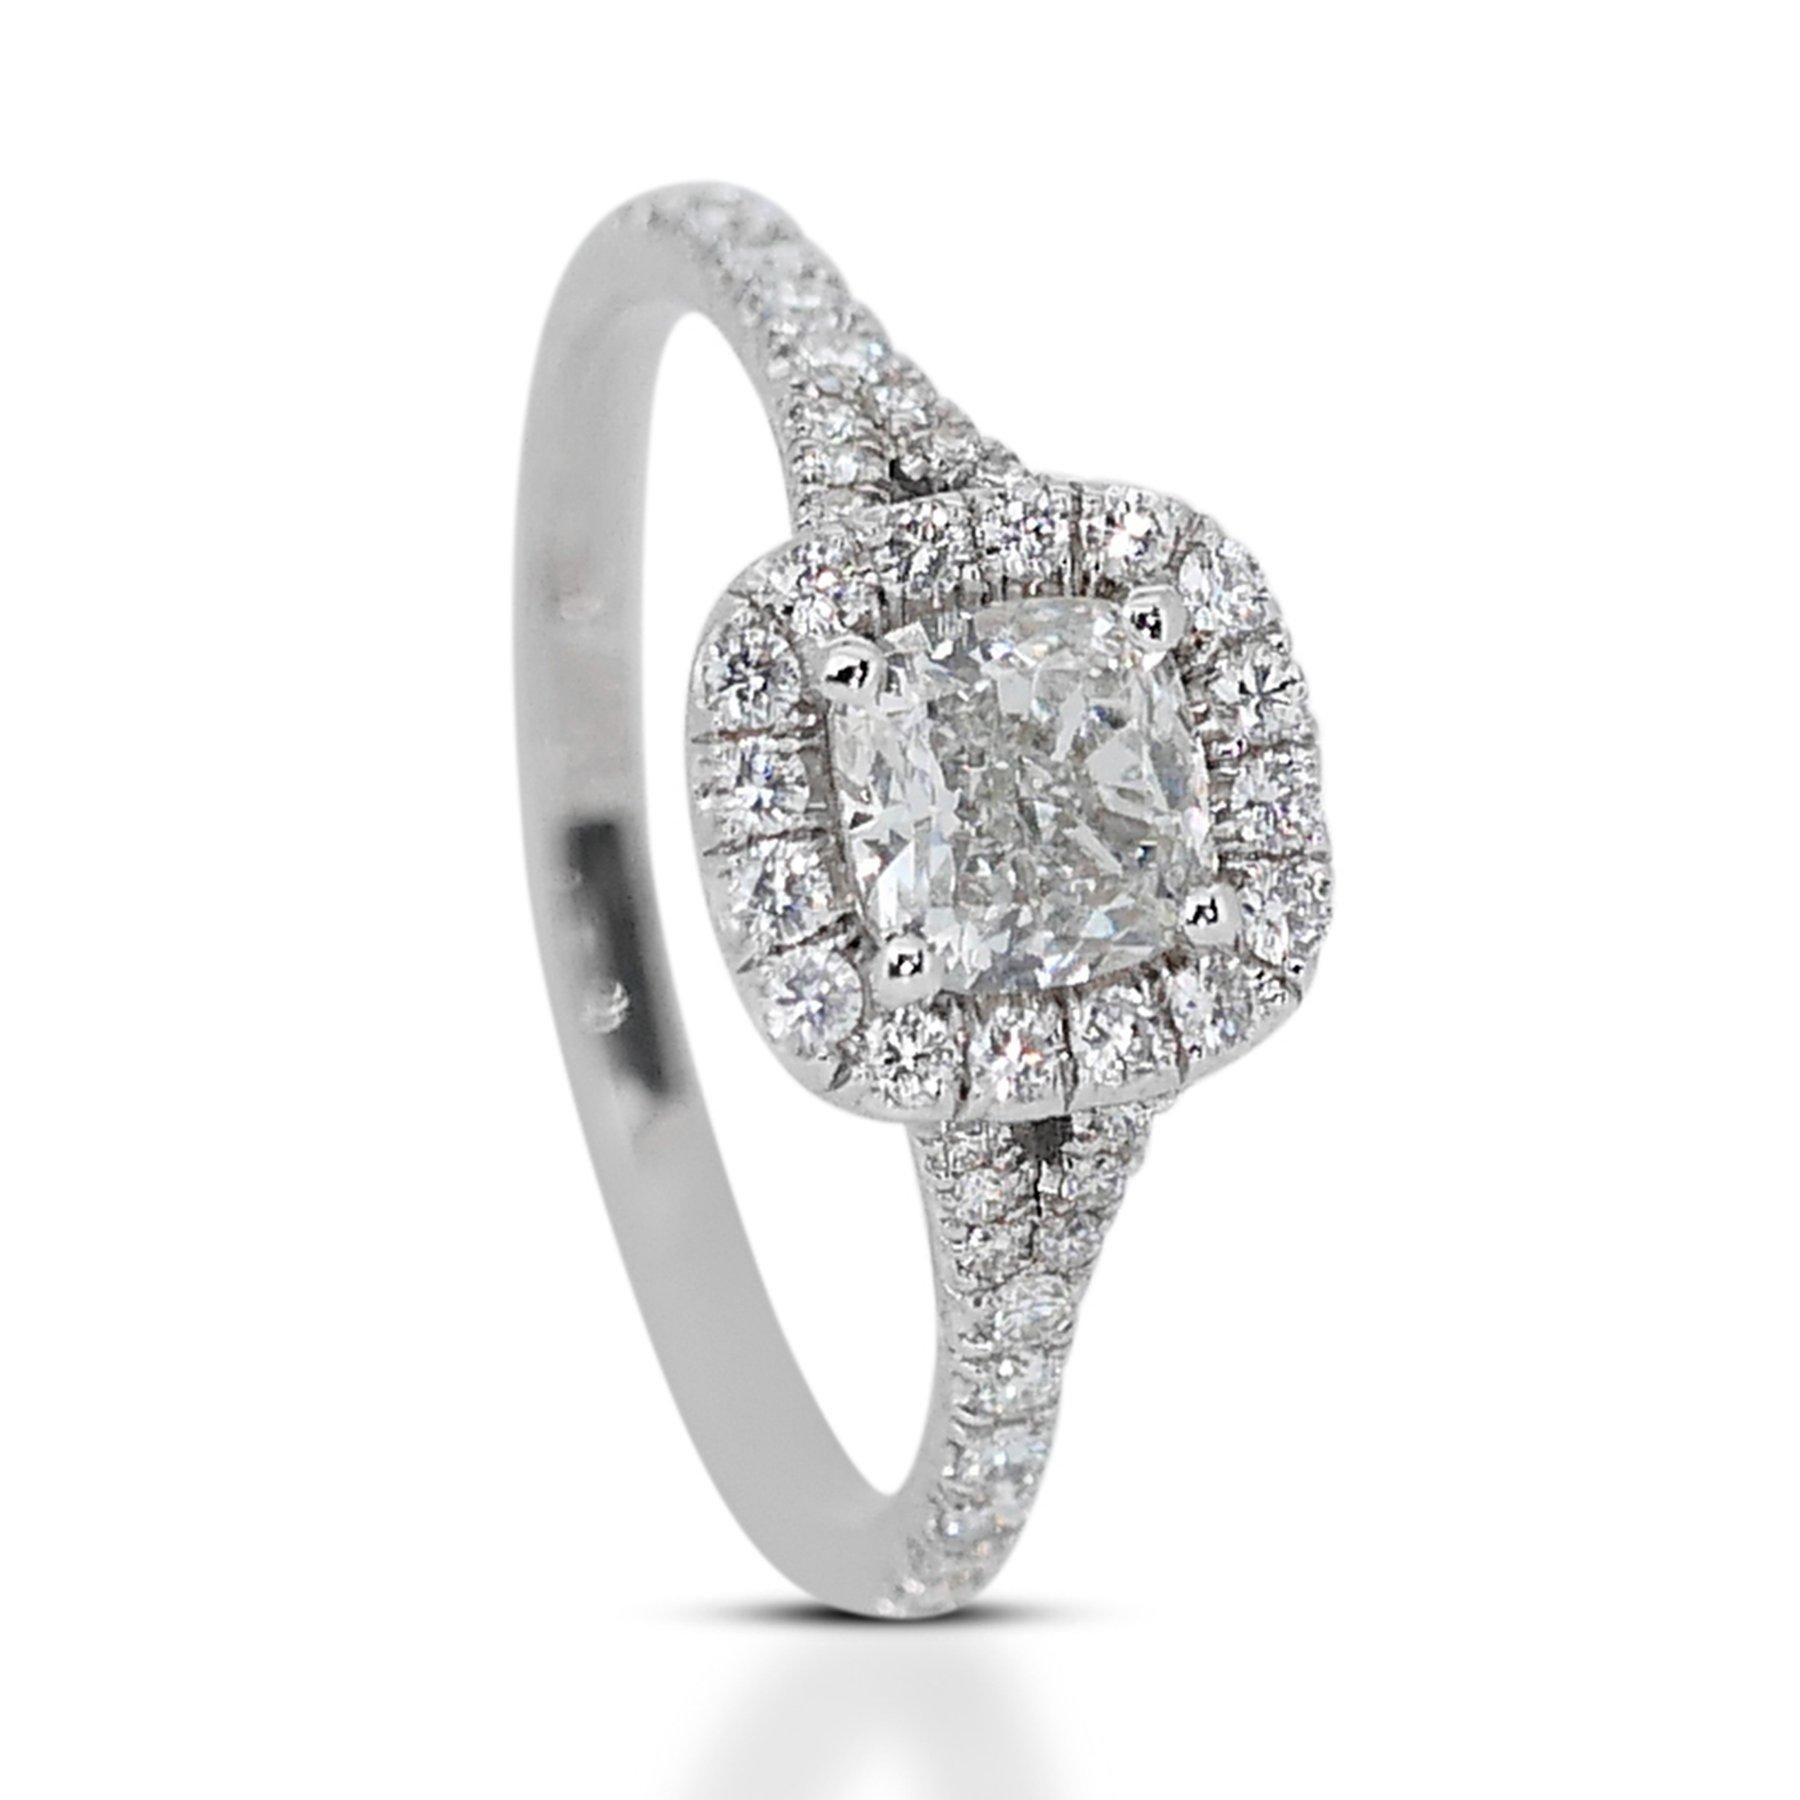 Elegant 1.40ct Cushion-Cut Diamond Halo Ring in 18k White Gold - GIA Certified In New Condition For Sale In רמת גן, IL